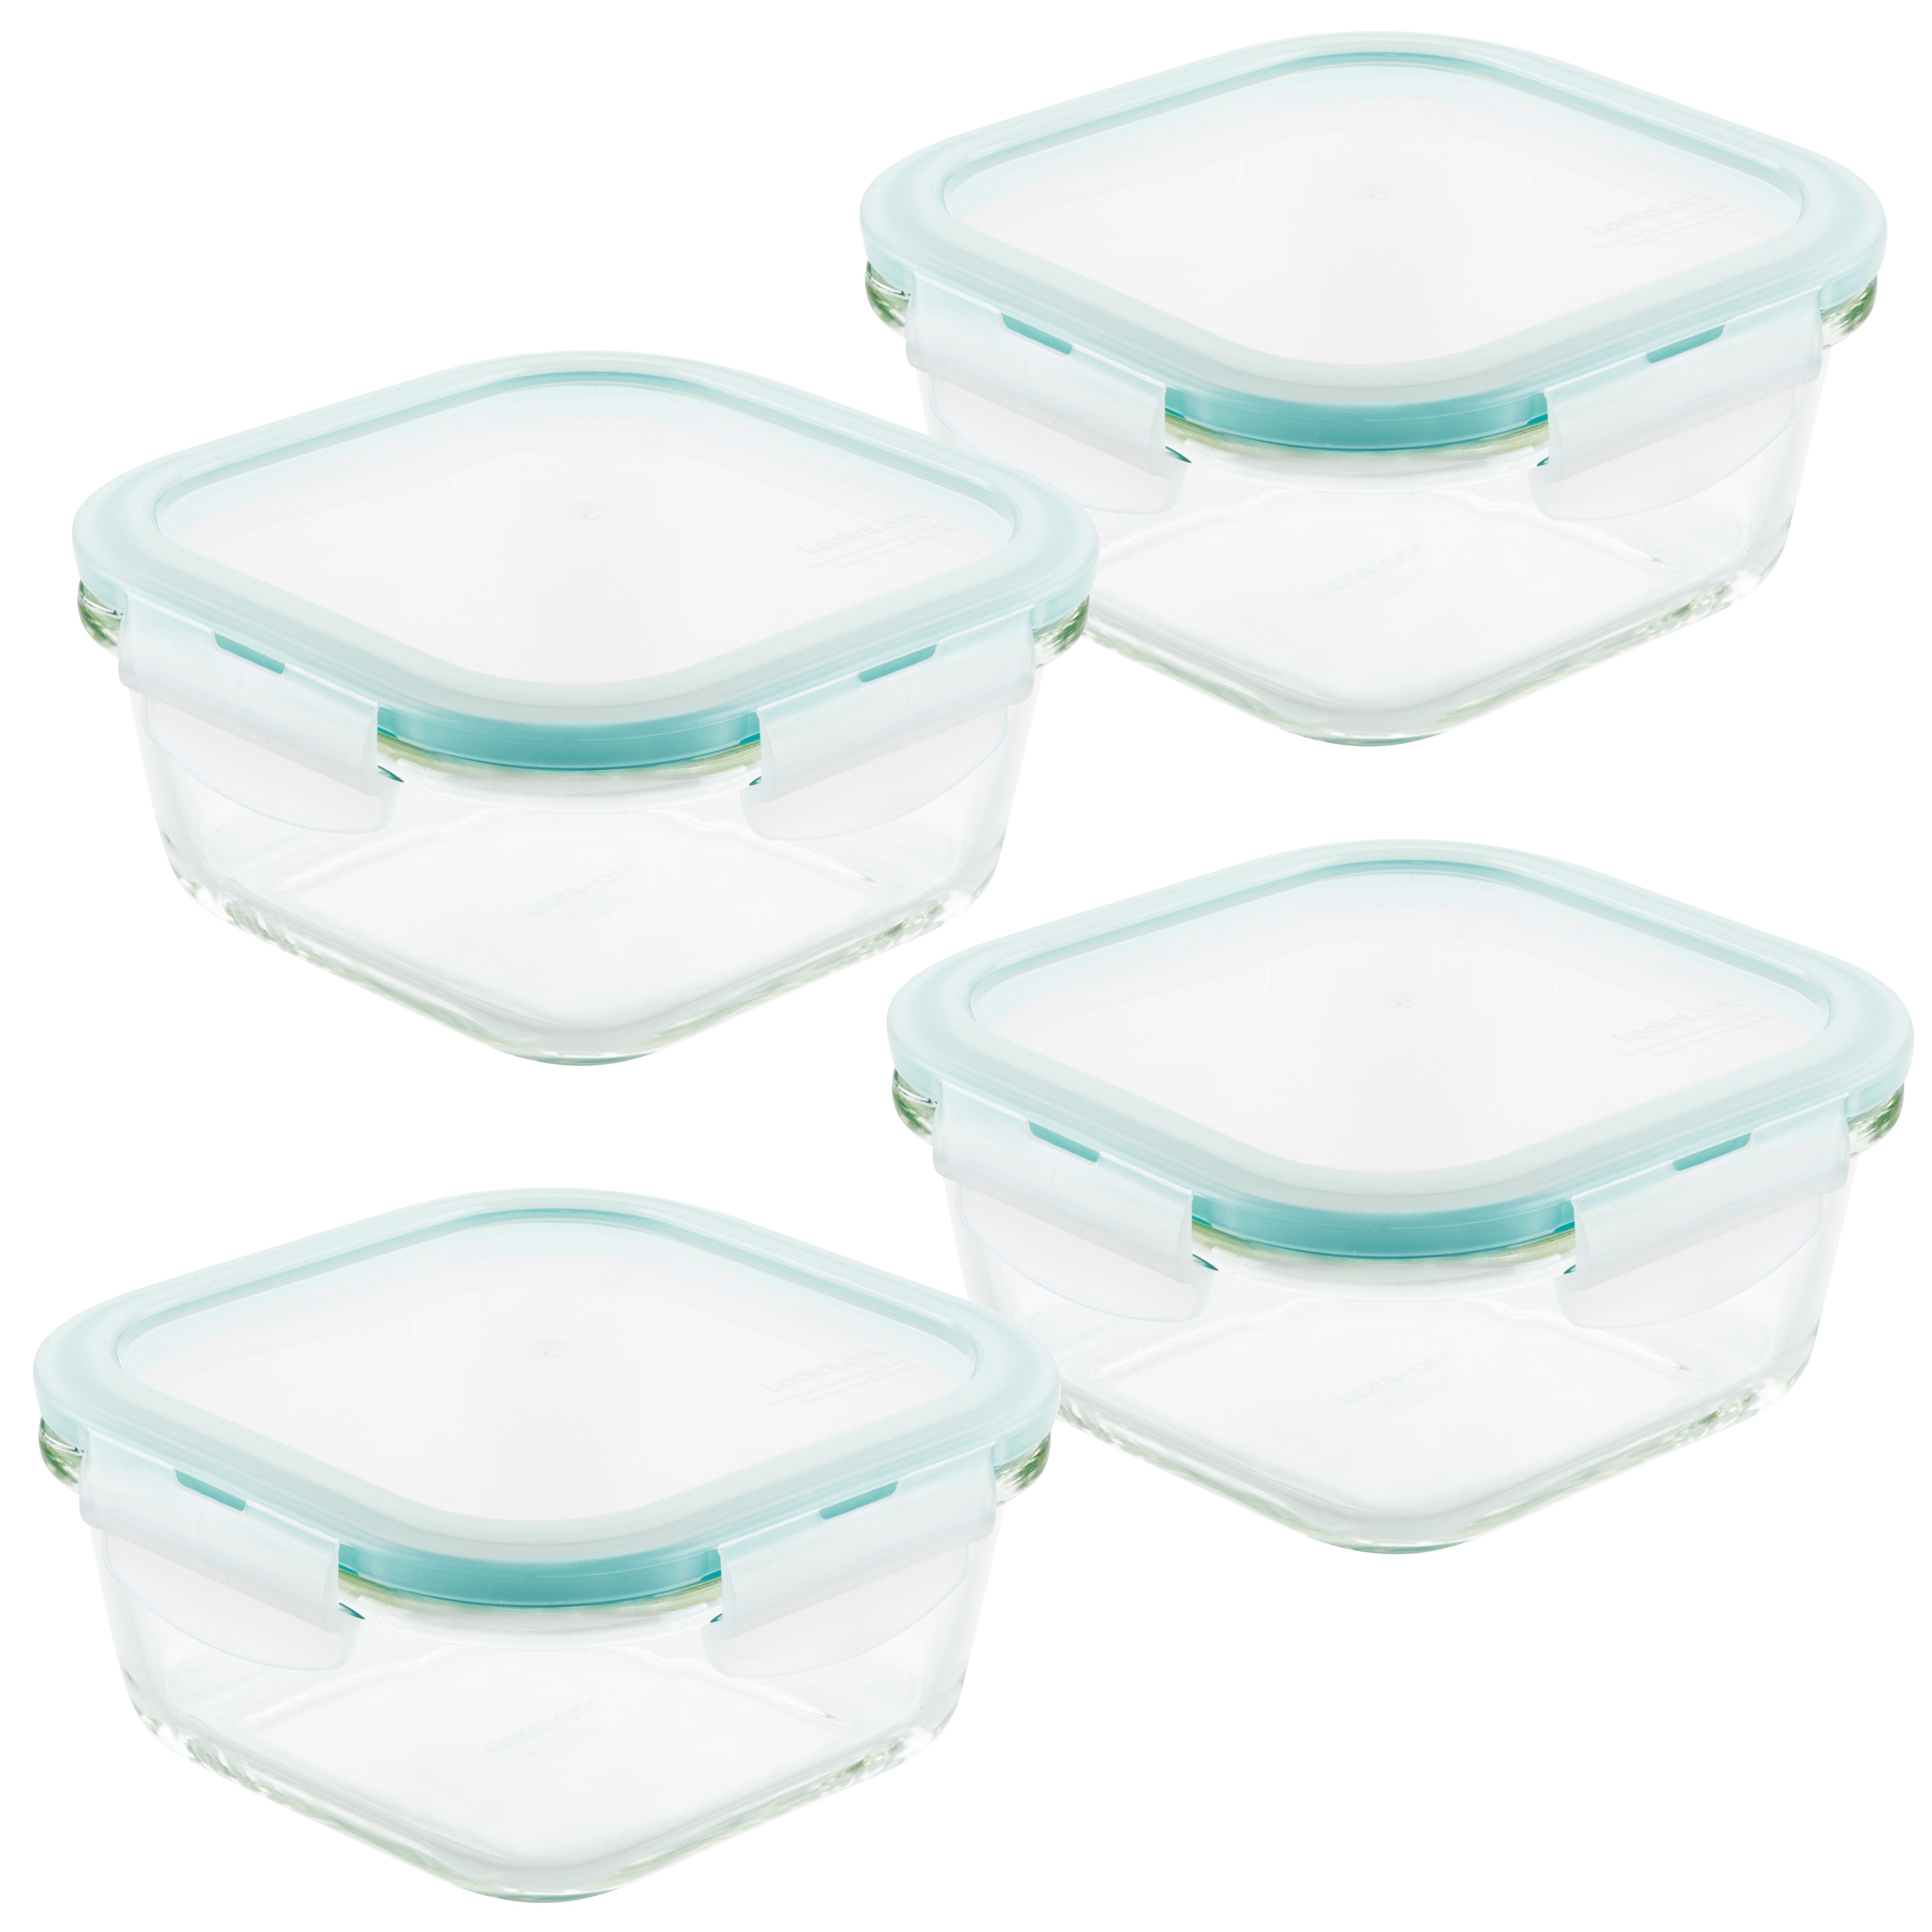 https://ak1.ostkcdn.com/images/products/is/images/direct/53f0ec8deebd5f3301a753ed77cbc55661ee4f32/LocknLock-Purely-Better-Glass-Square-Food-Storage-Containers%2C-17-Ounce%2C-Set-of-Four.jpg